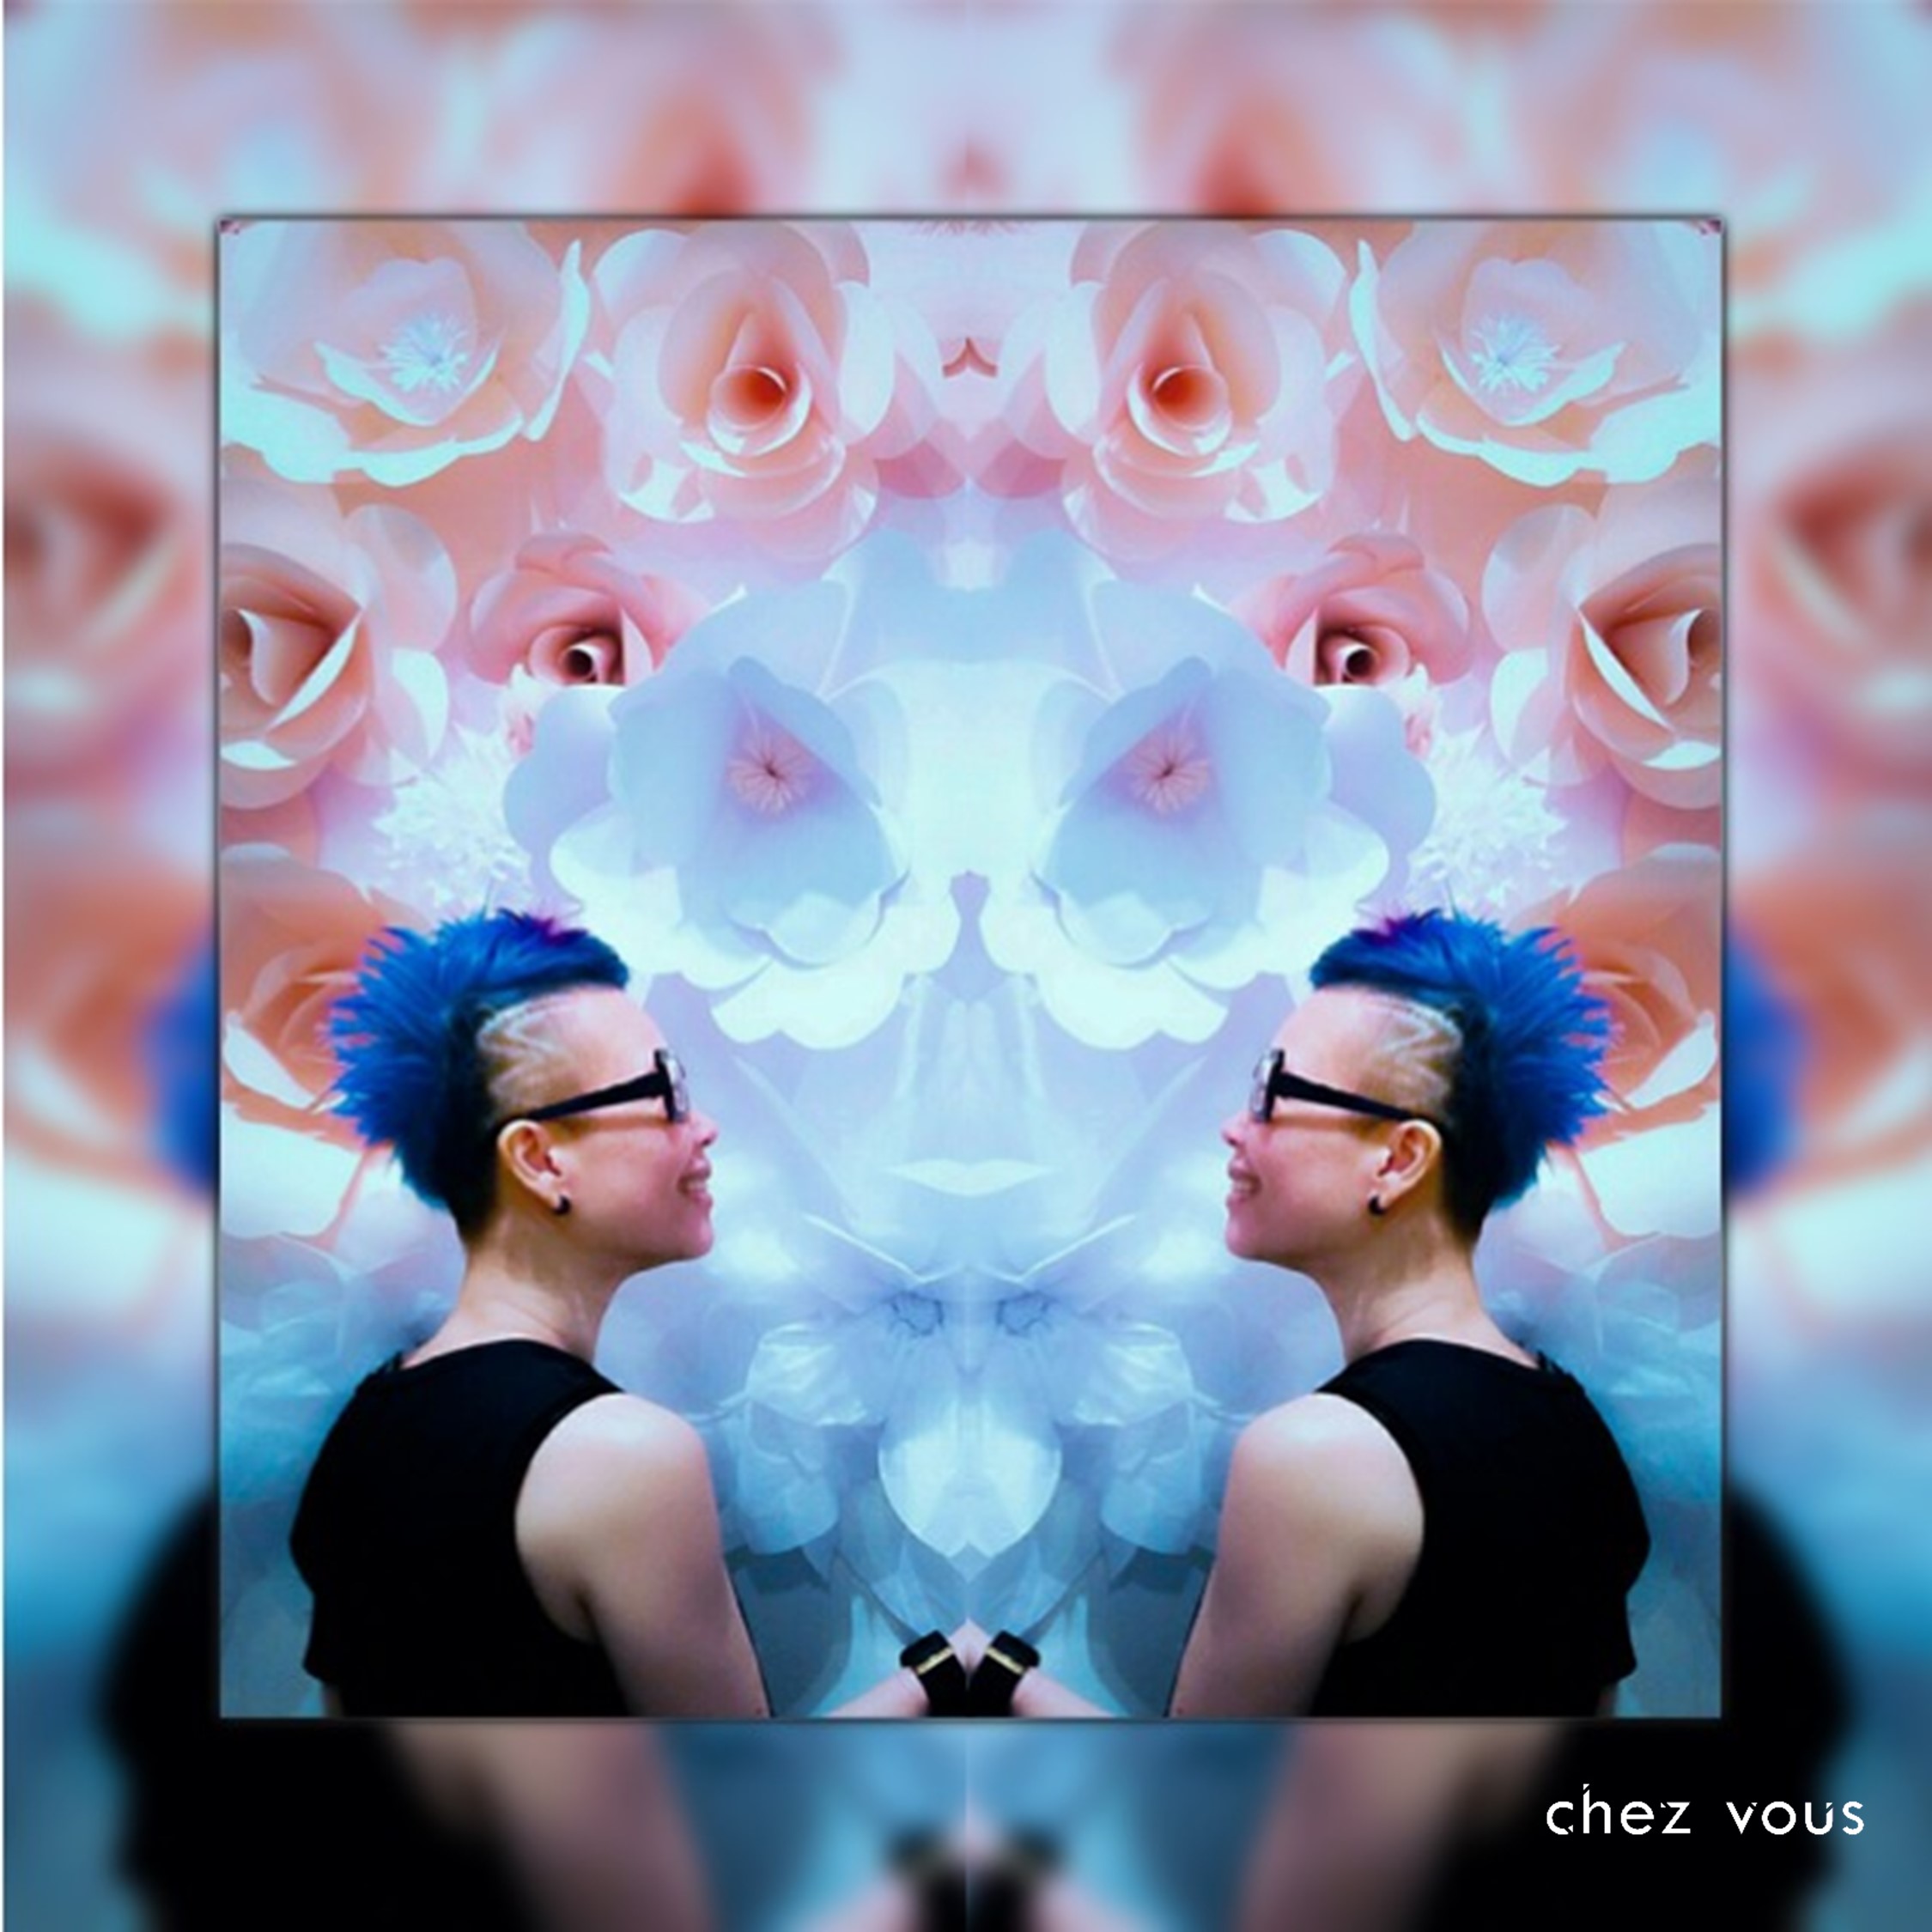 Done by Associate Salon Director of Chez Vous: Readen Chia | Design: Melted Neon Blue